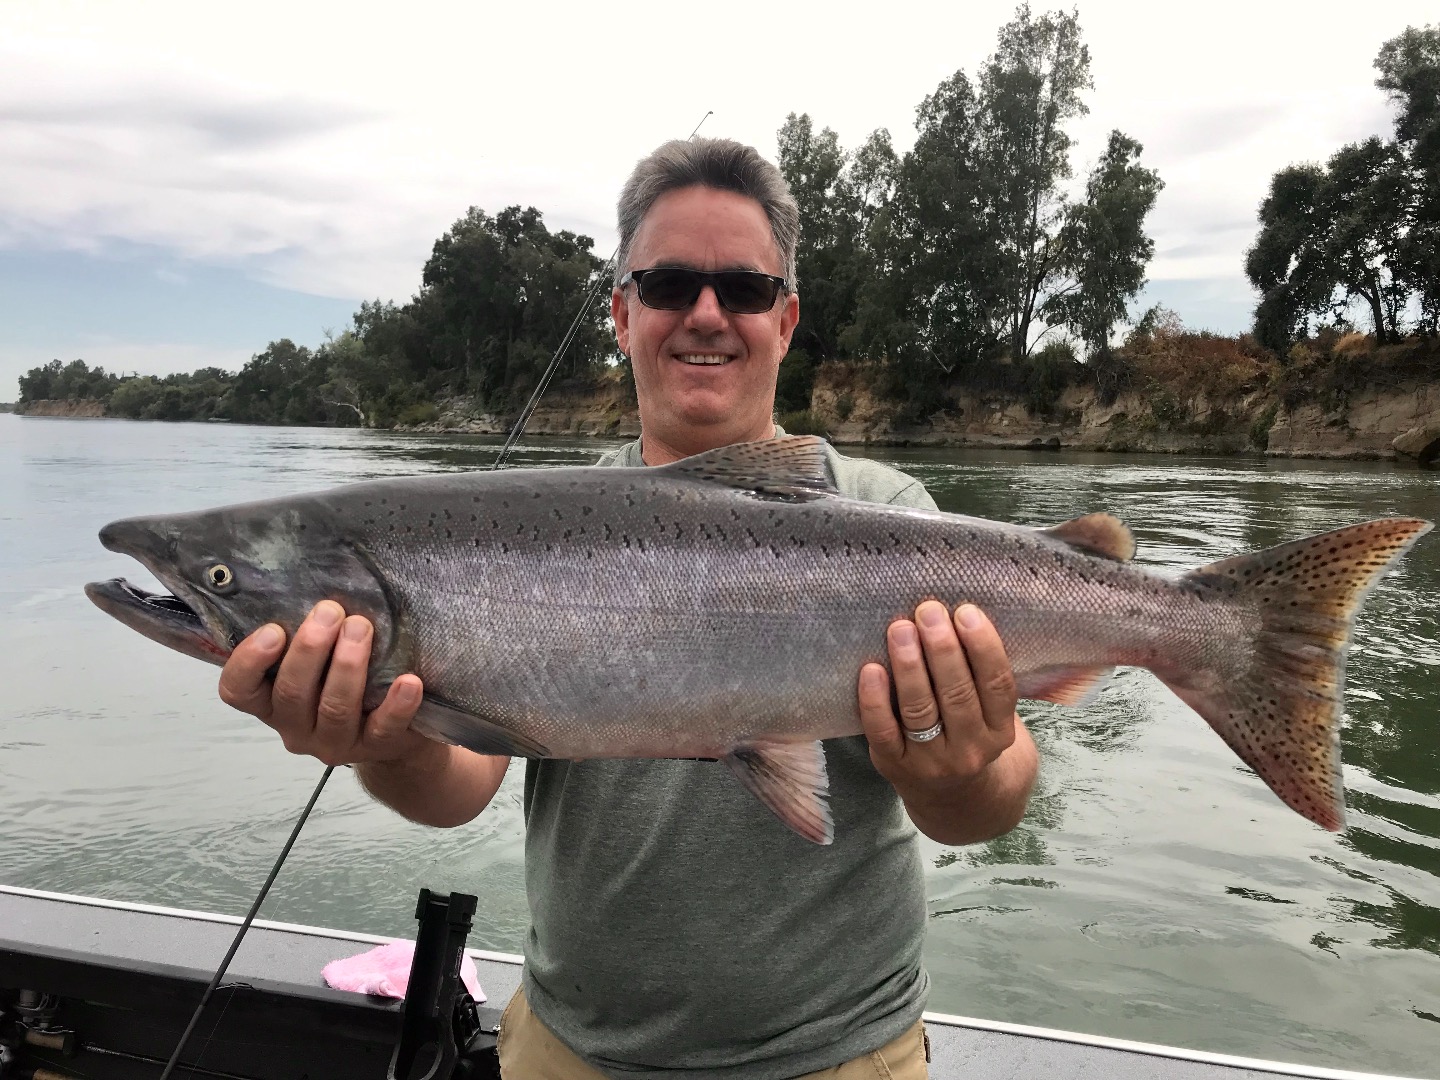 Slower day on the Sacramento River for King salmon.